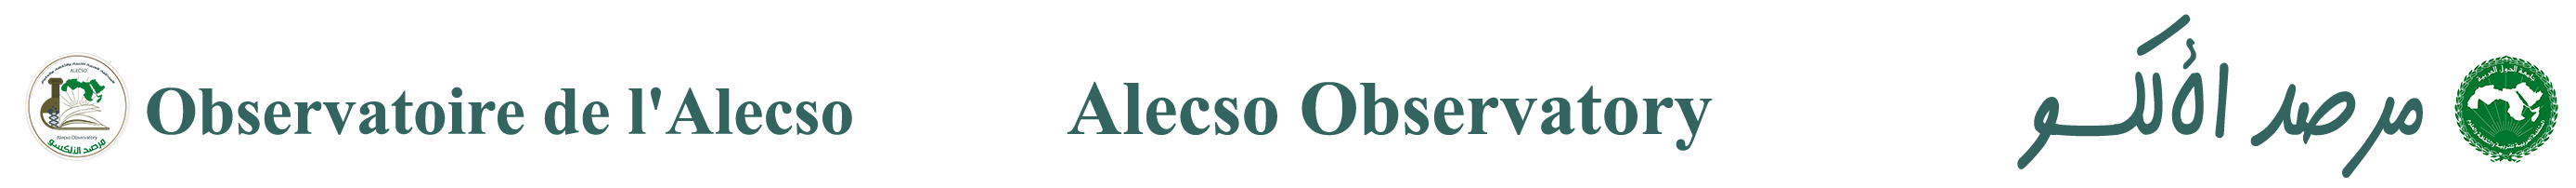 ALECSO observatory databases